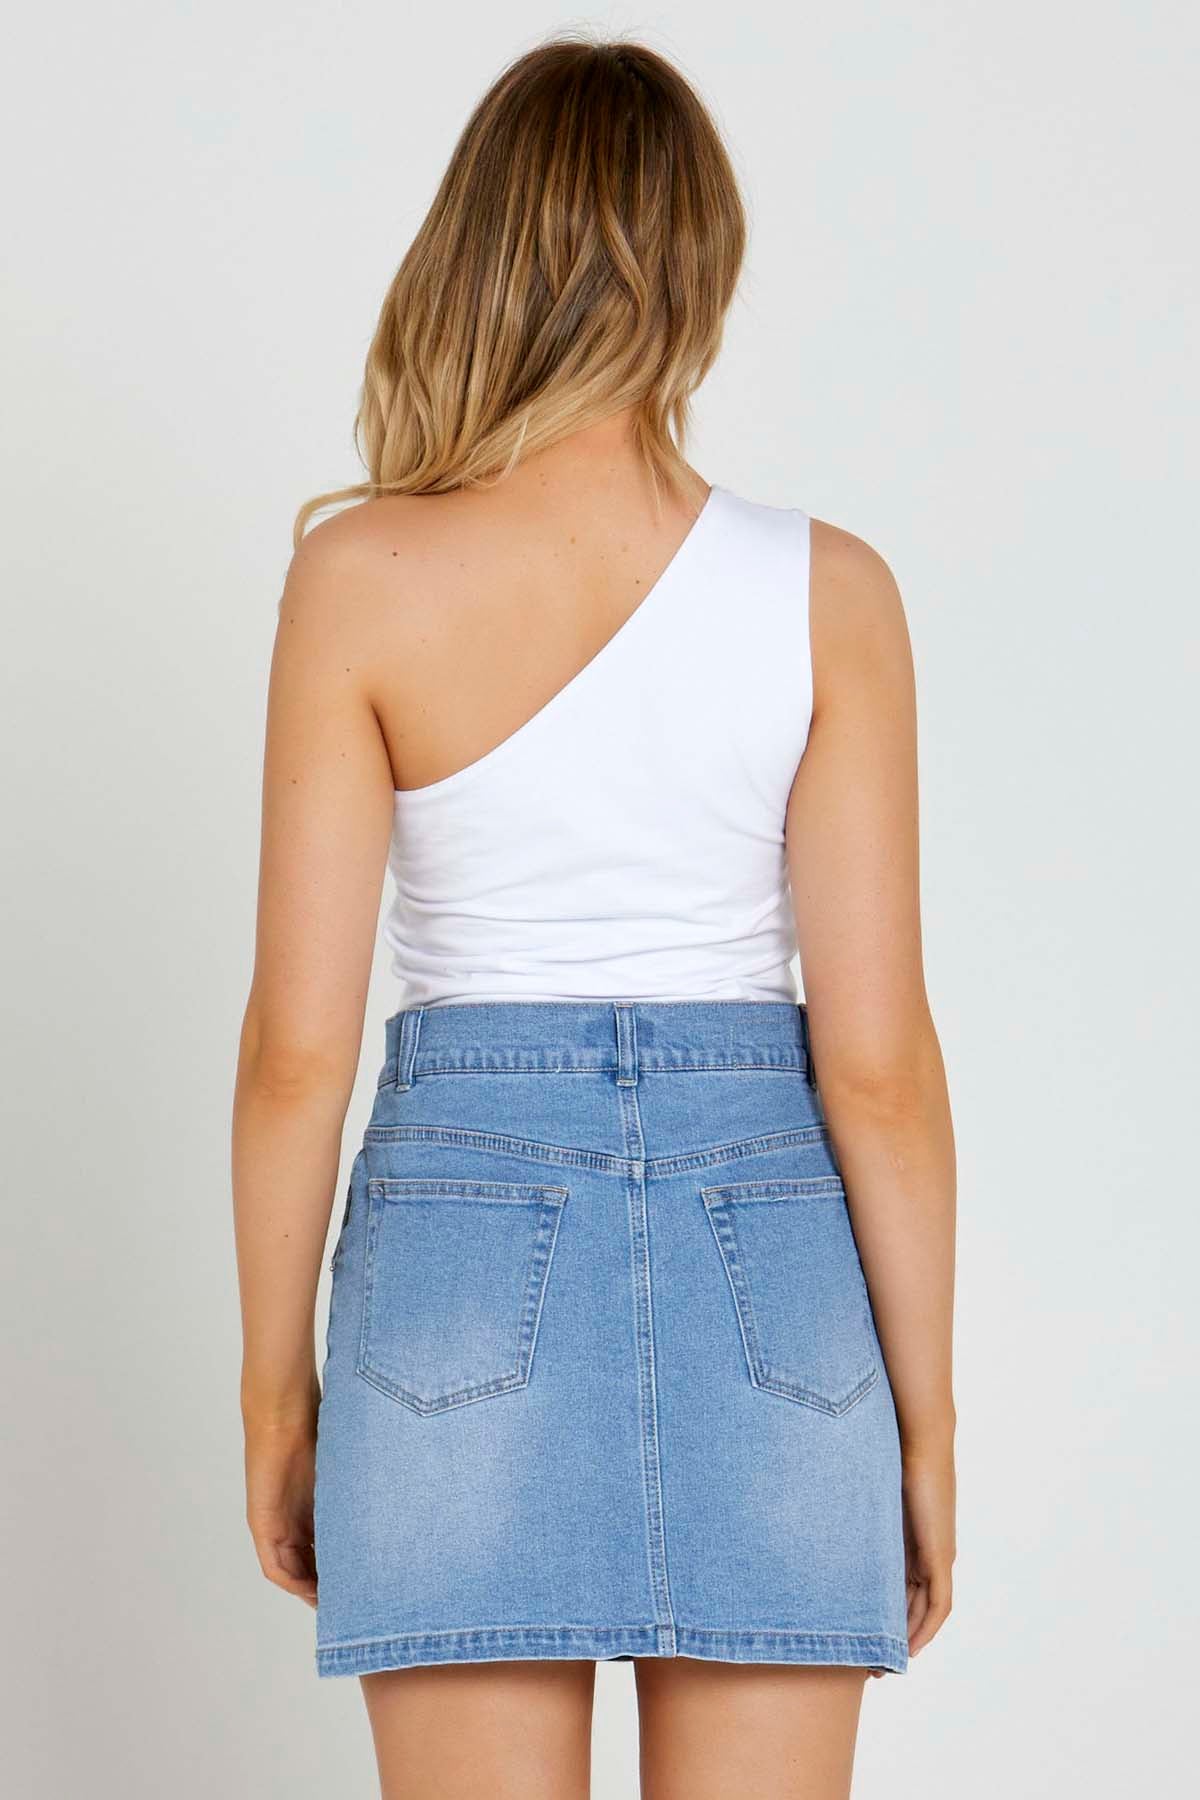 Sass Bec One Shoulder Top in White